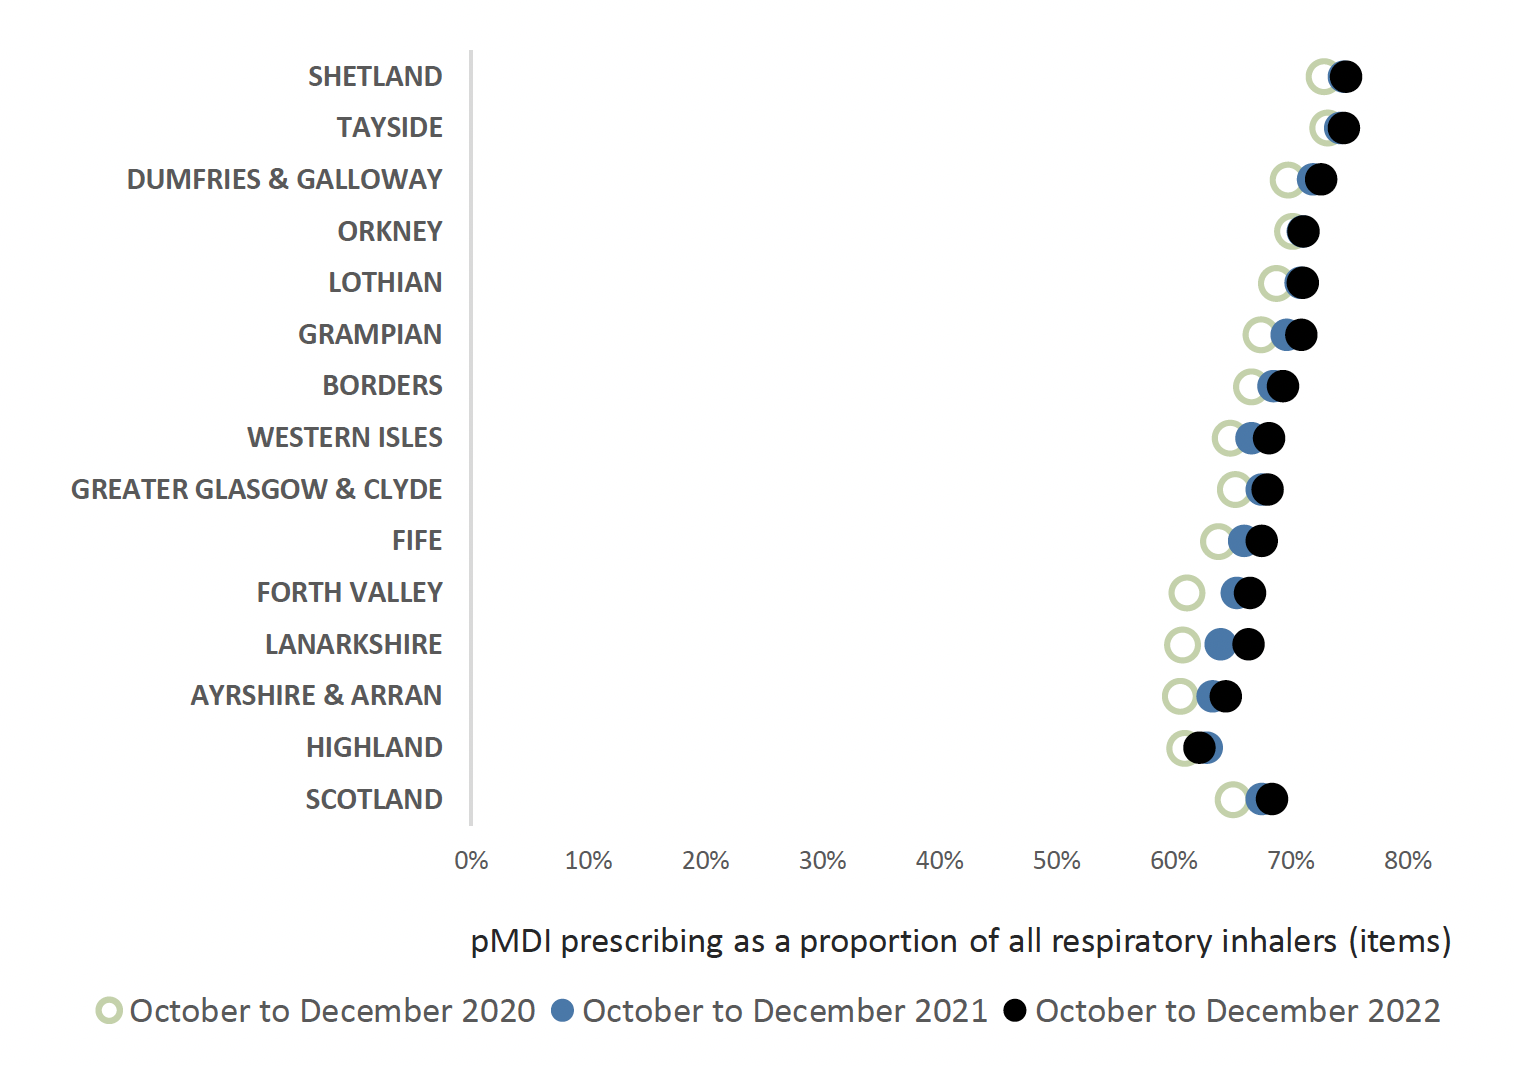 Chart showing variance in proportion of pMDIs versus all inhalers across all health boards and Scotland from 2020 to 2022. Overall Scotland trend is increasing